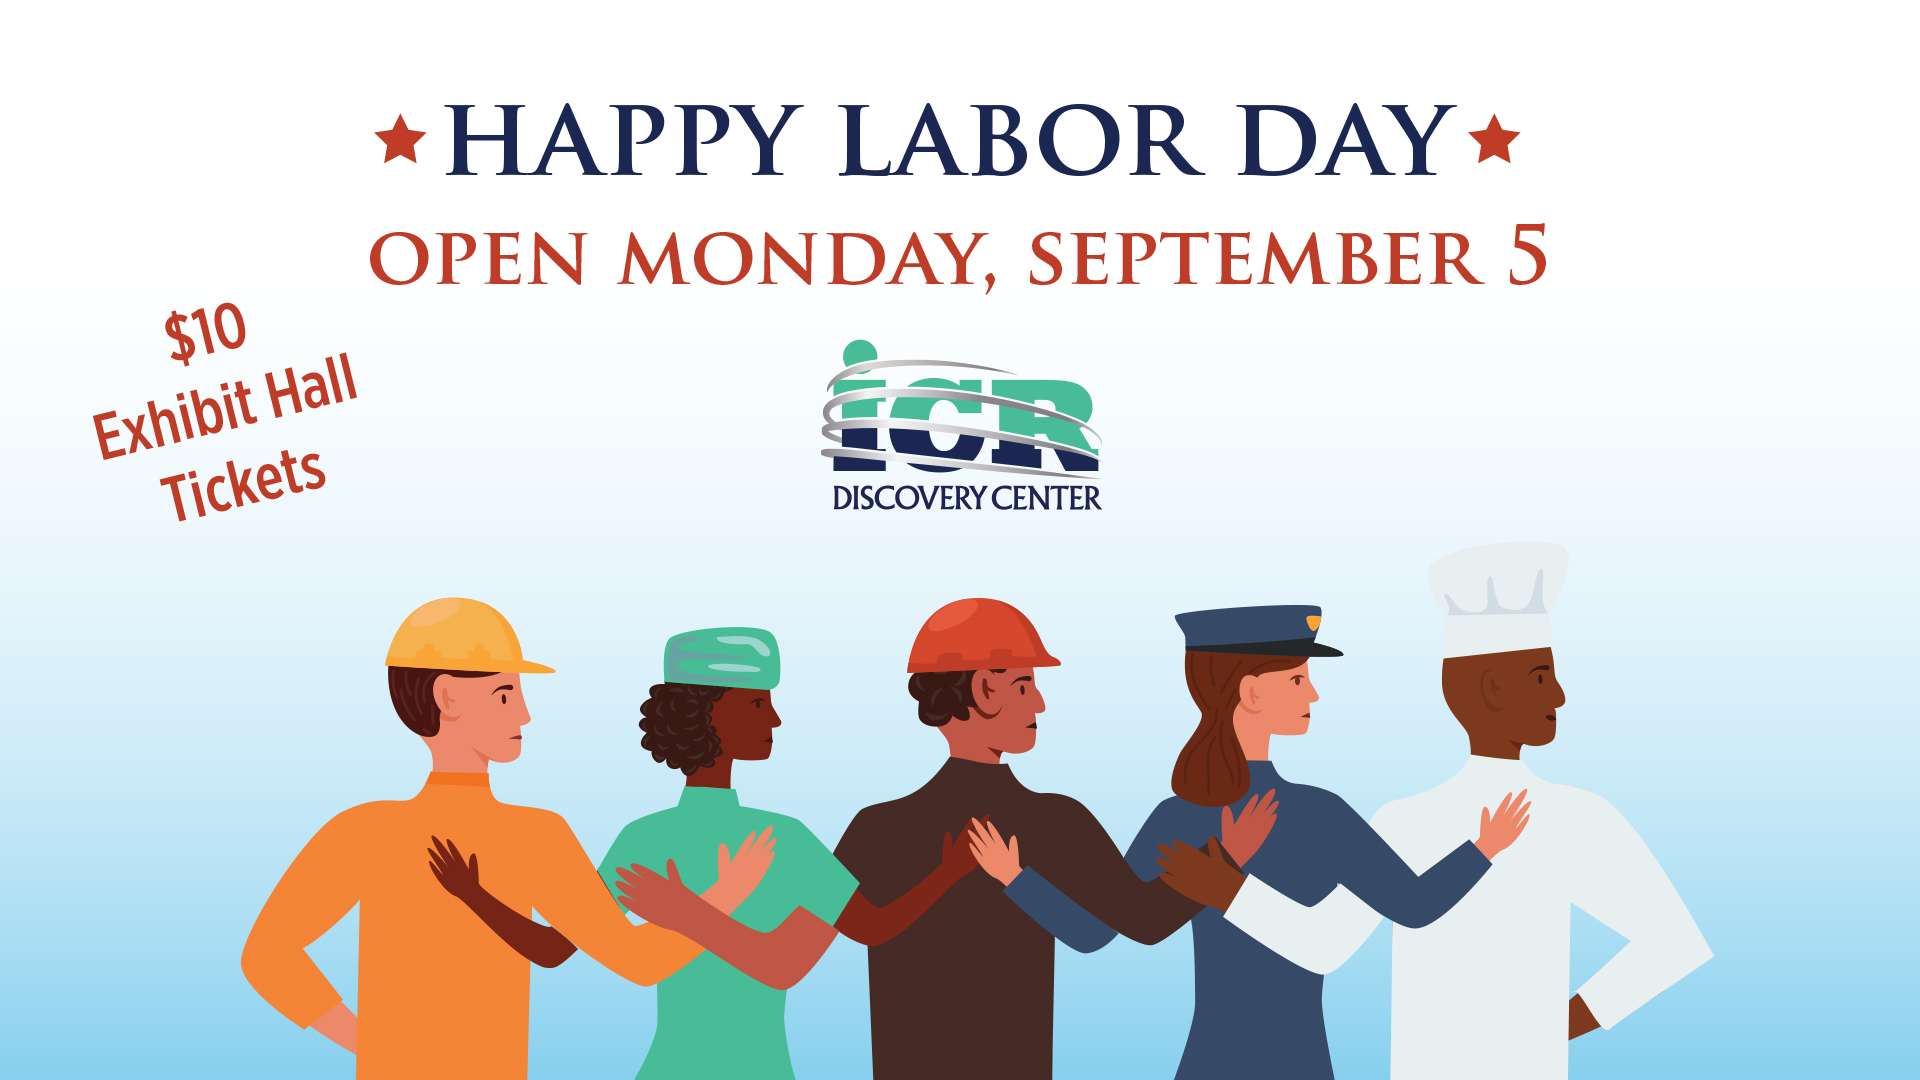 Happy Labor Day - Open Monday, September 5 - $10 Exhibit Hall Tickets